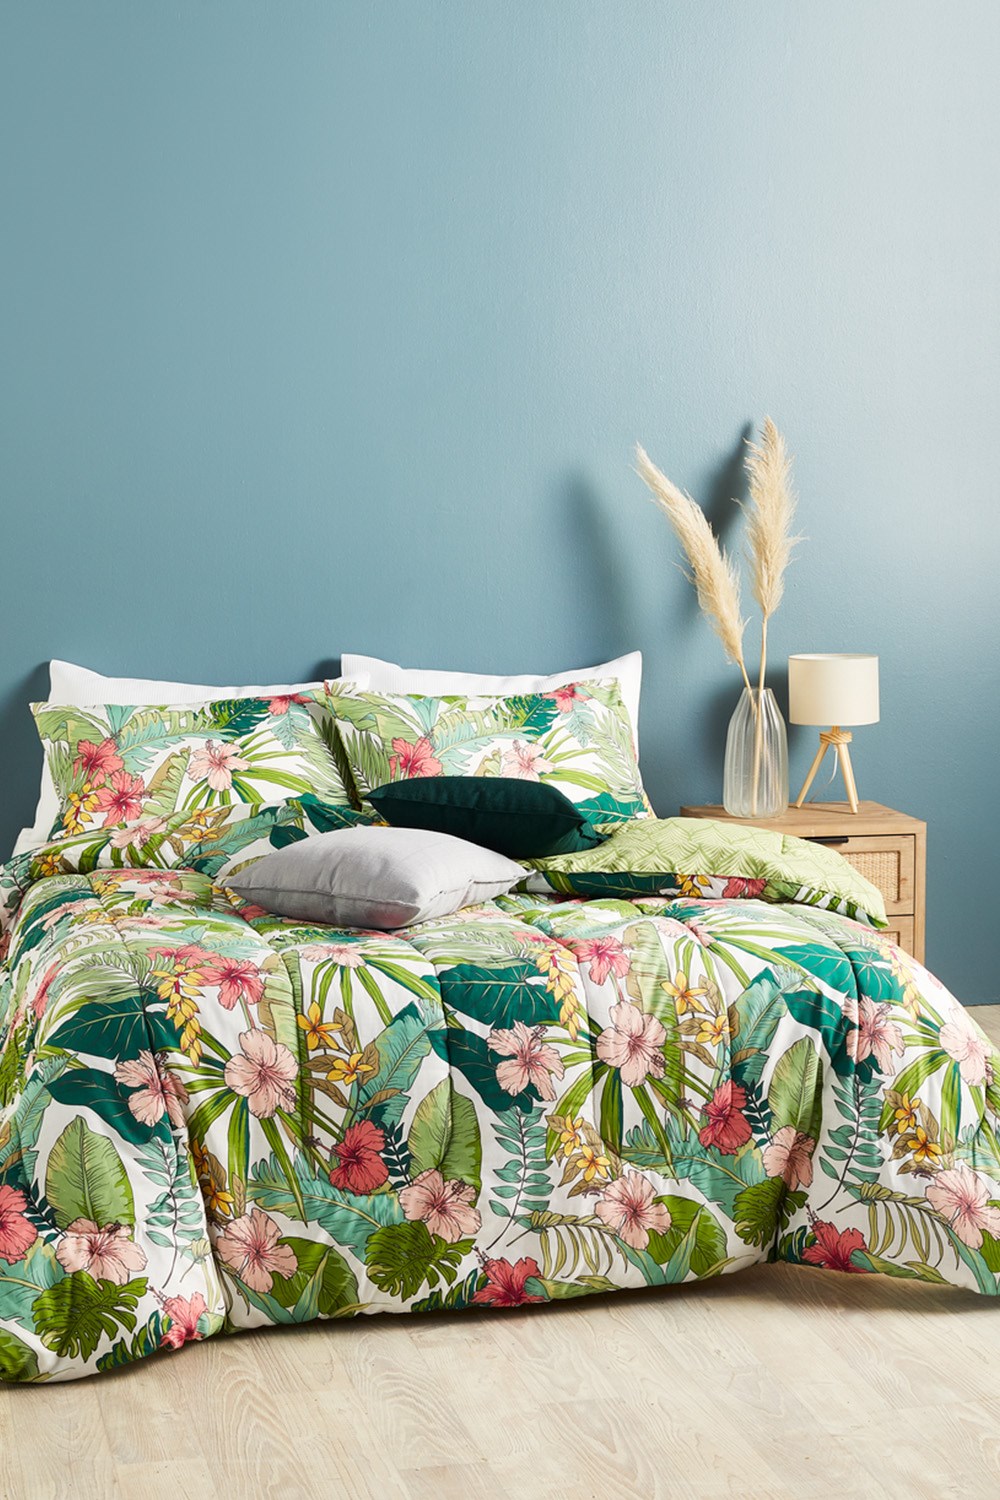 Top picks from Big W’s spring collection | Better Homes and Gardens